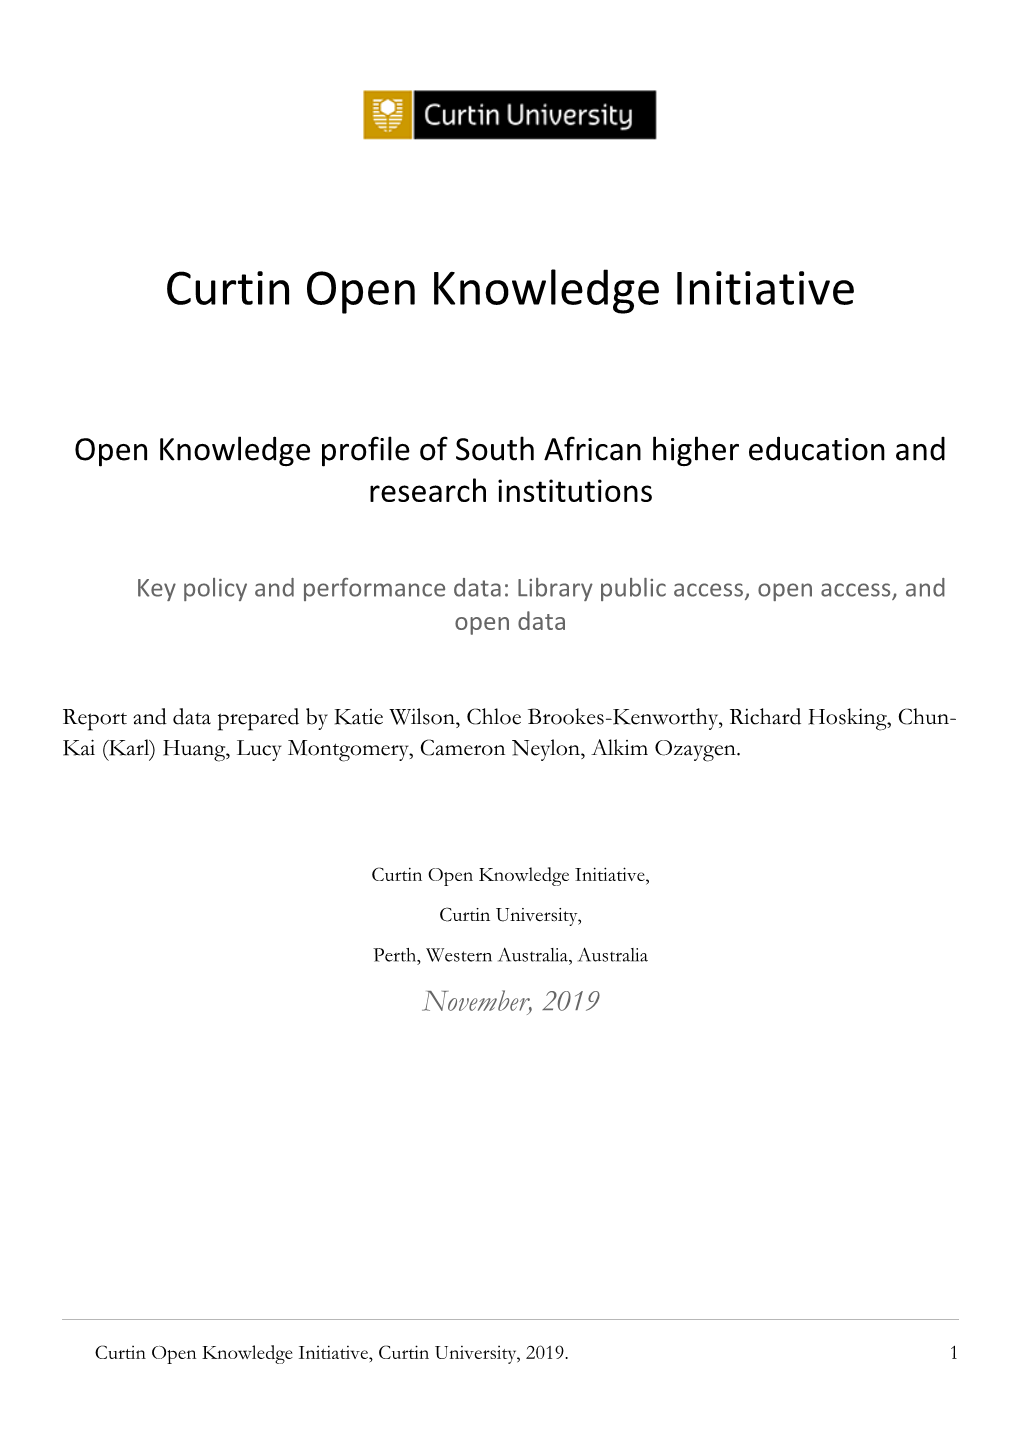 South African Higher Education and Research Institutions